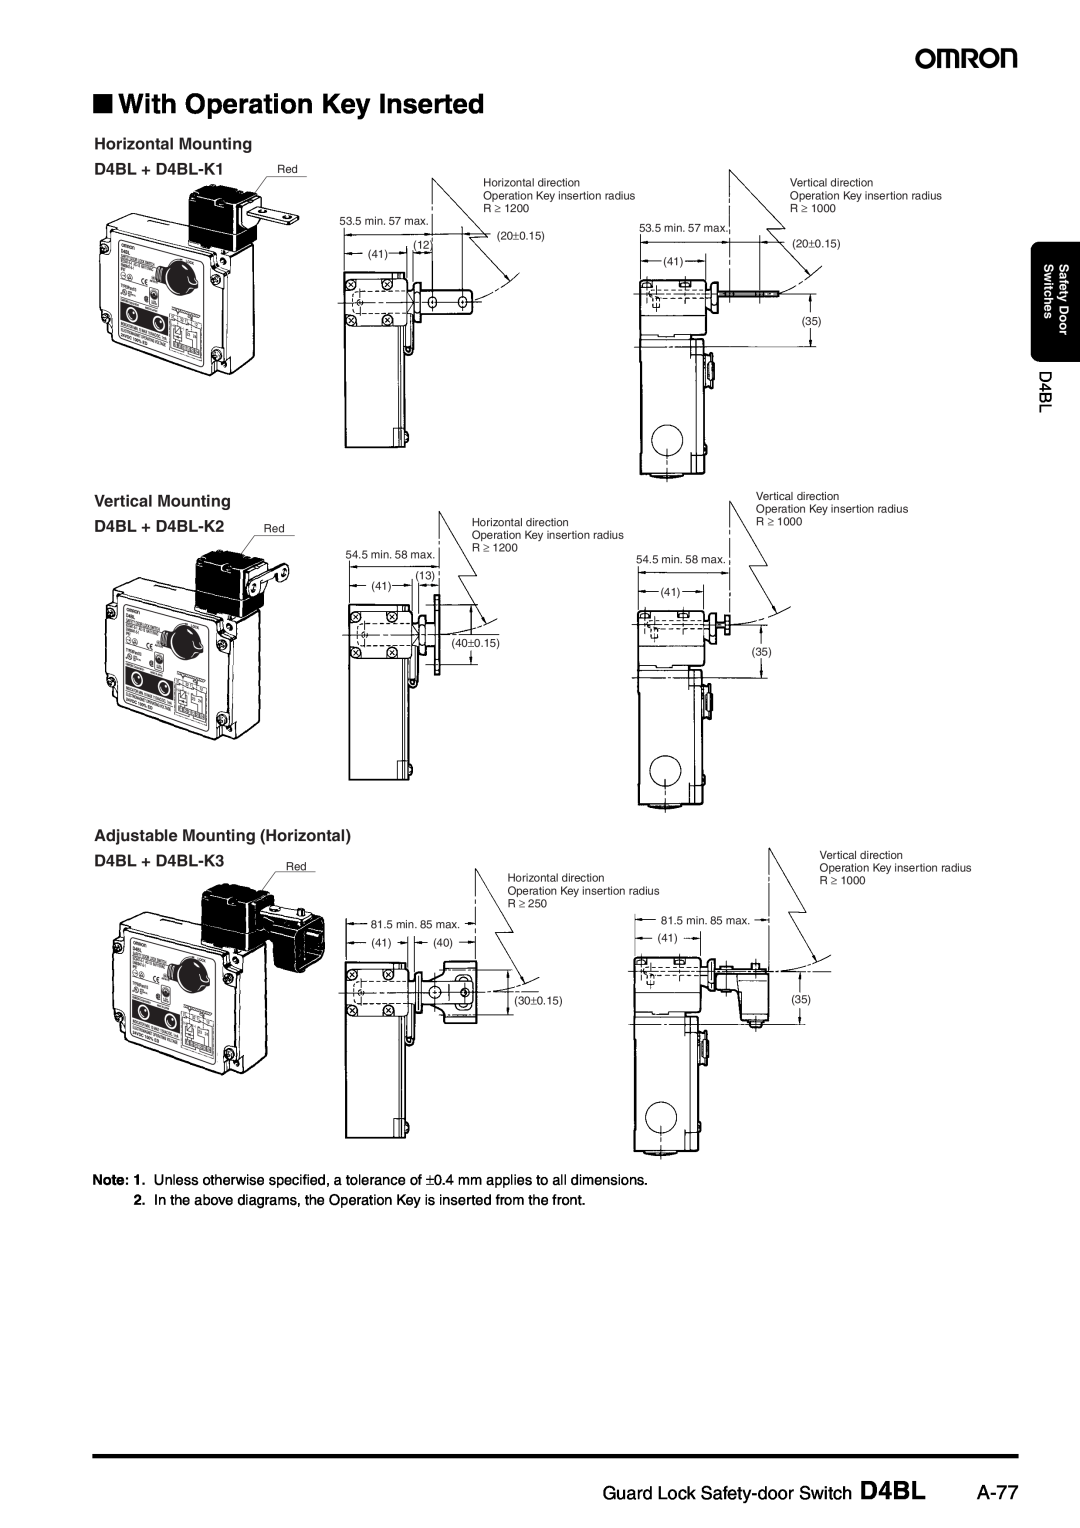 Omron manual With Operation Key Inserted, A-77, Horizontal Mounting D4BL + D4BL-K1 Vertical Mounting D4BL + D4BL-K2 